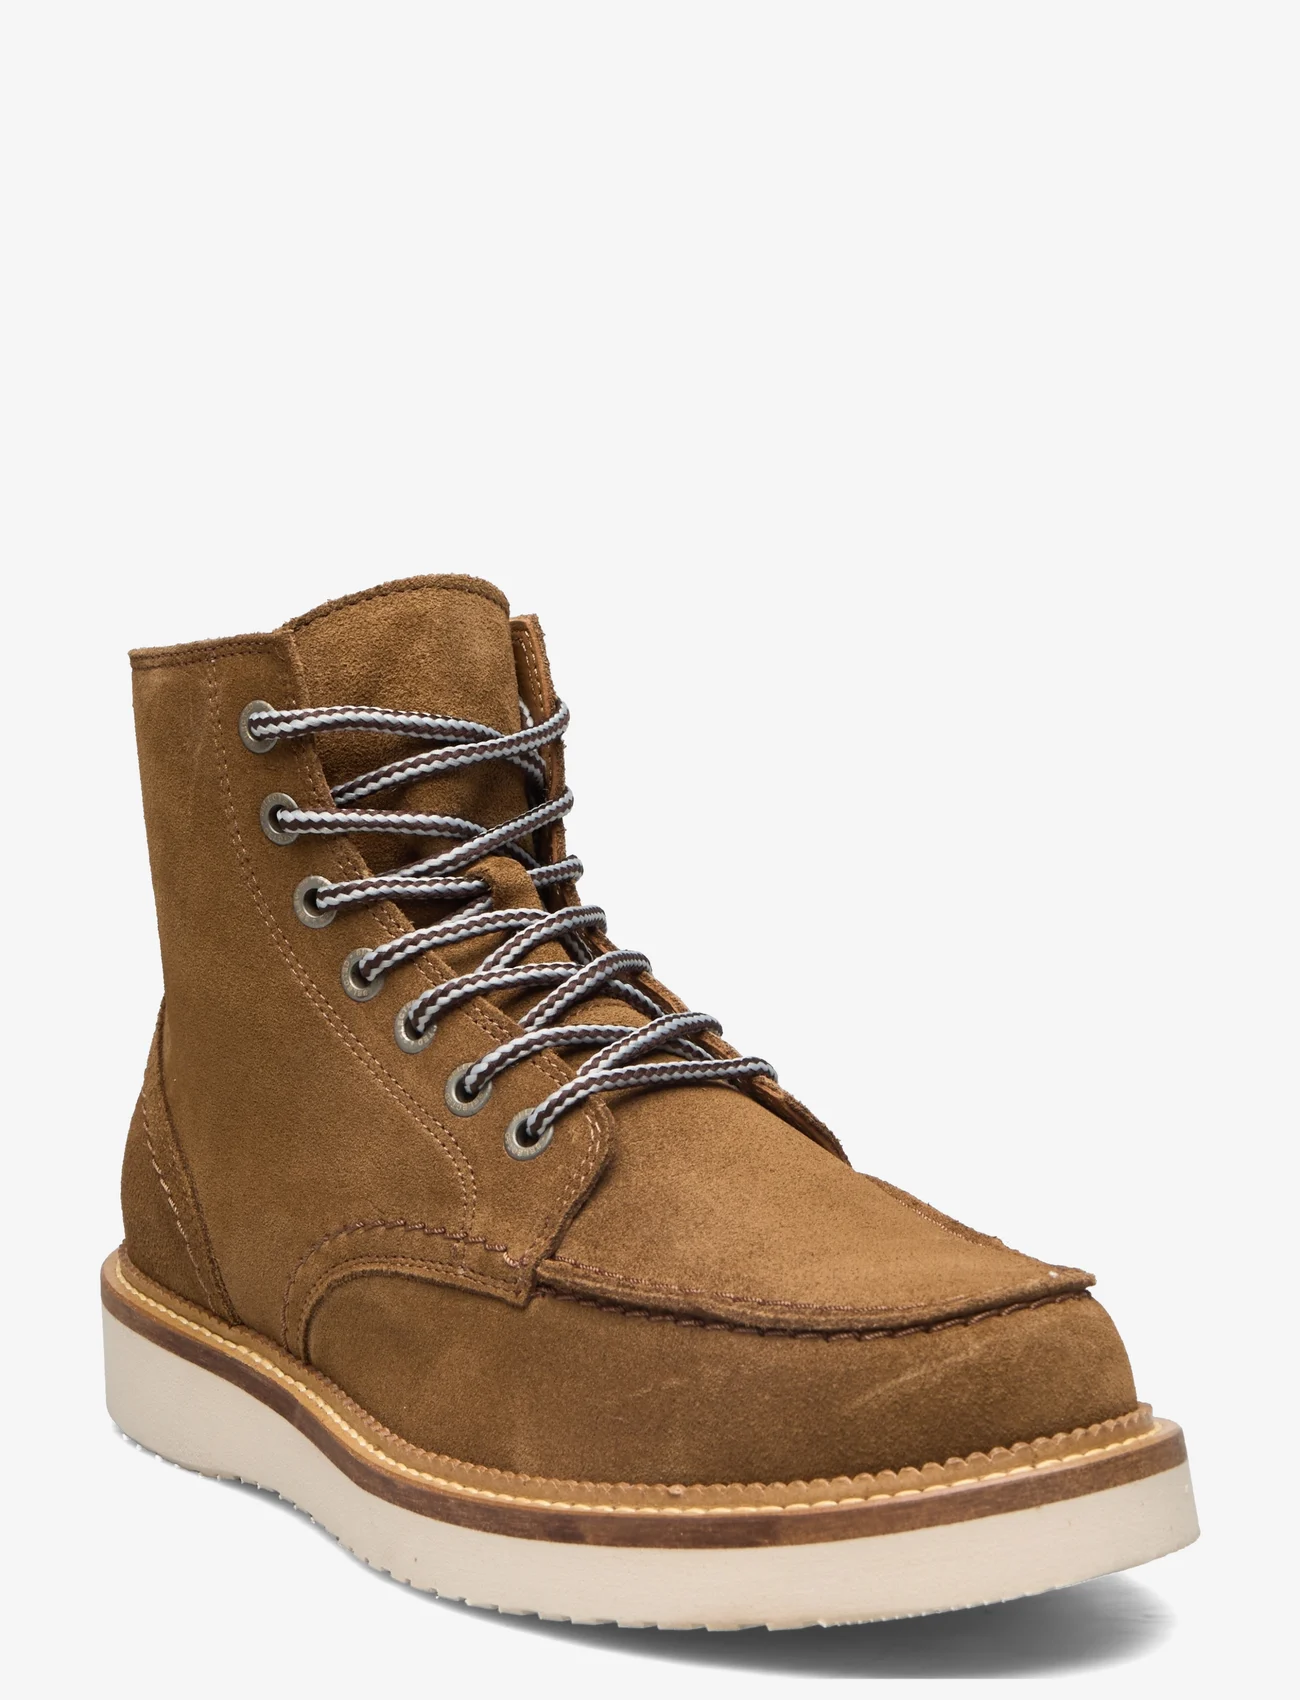 Selected Homme - SLHTEO NEW SUEDE MOC-TOE BOOT B - schnürschuhe - tobacco brown - 0